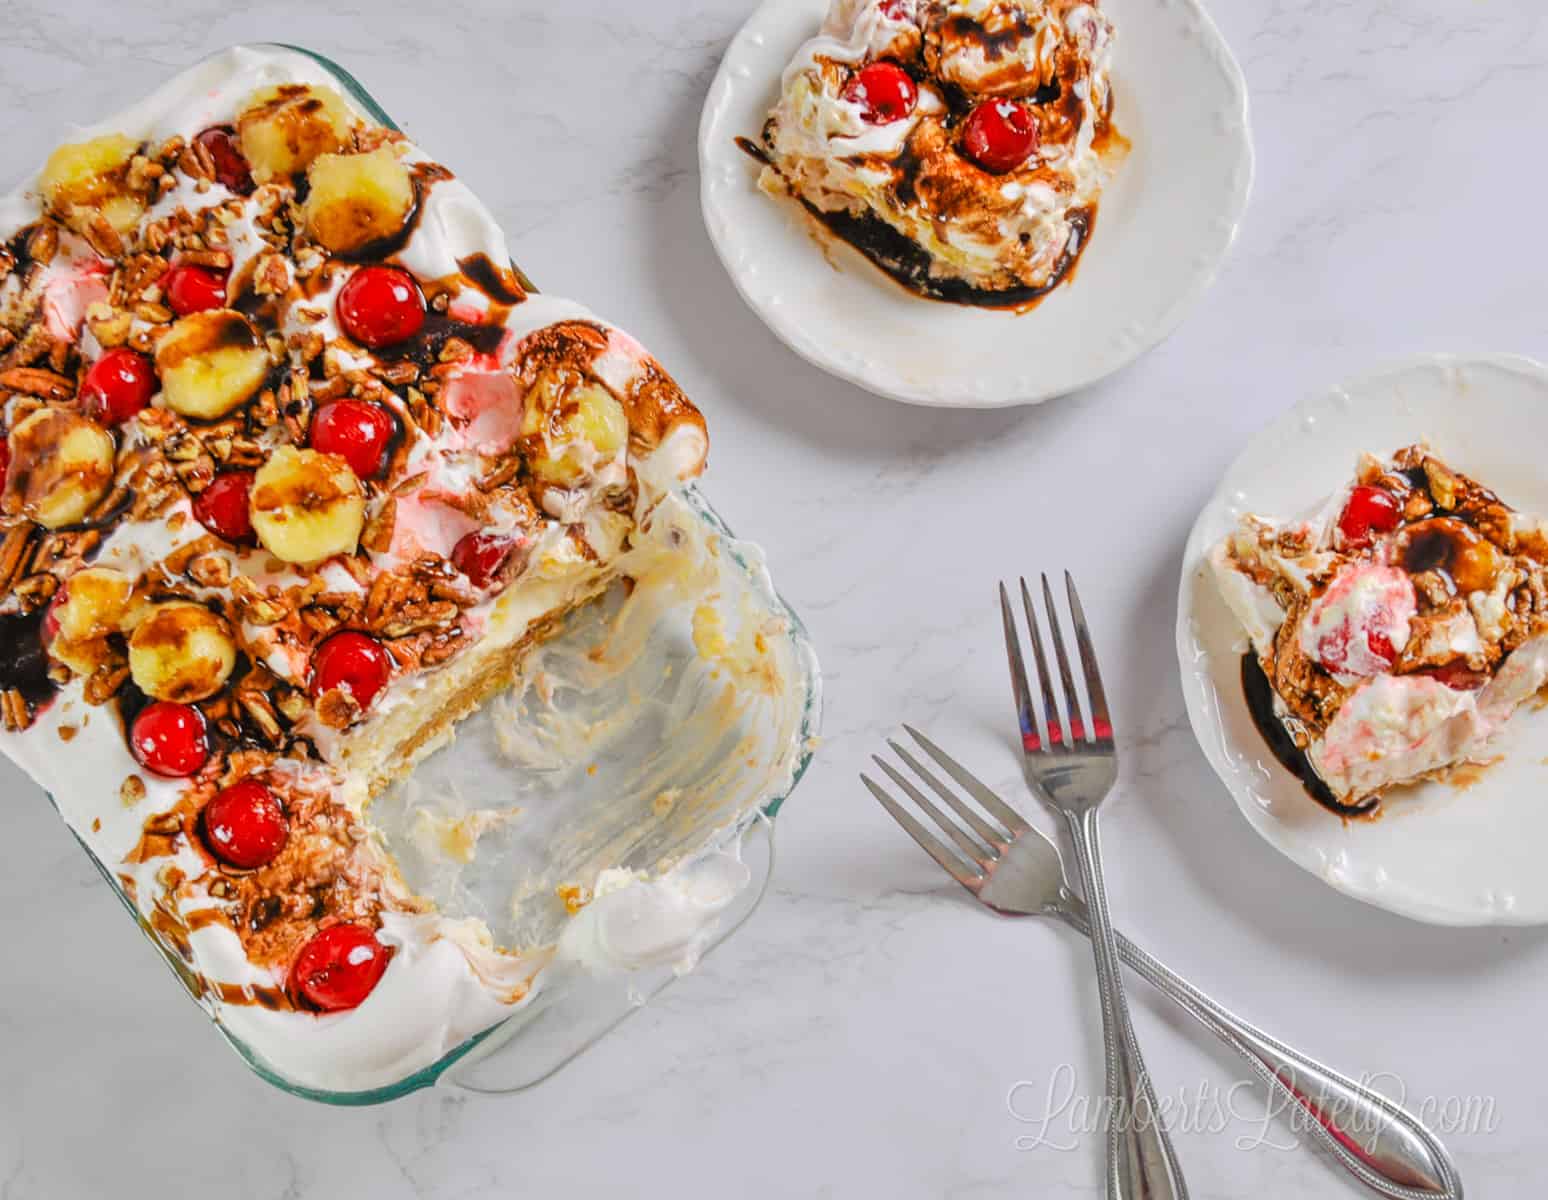 banana split cake in a baking dish, with two plates and slices, and forks.